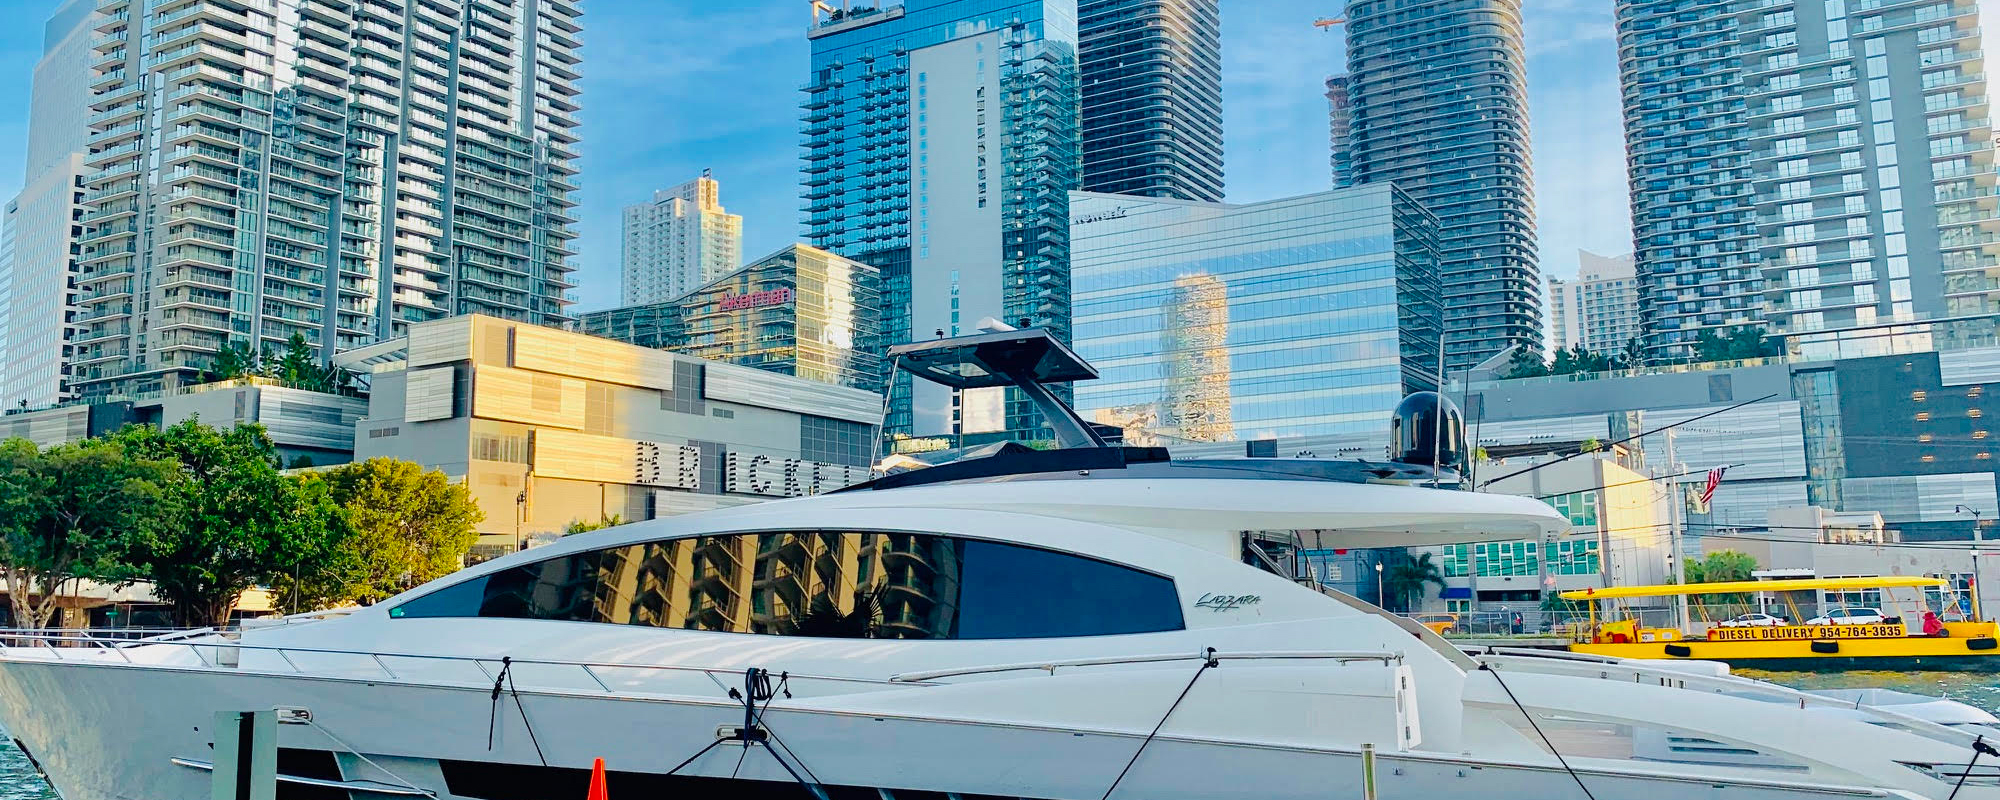 Yacht in Brickell City Centre